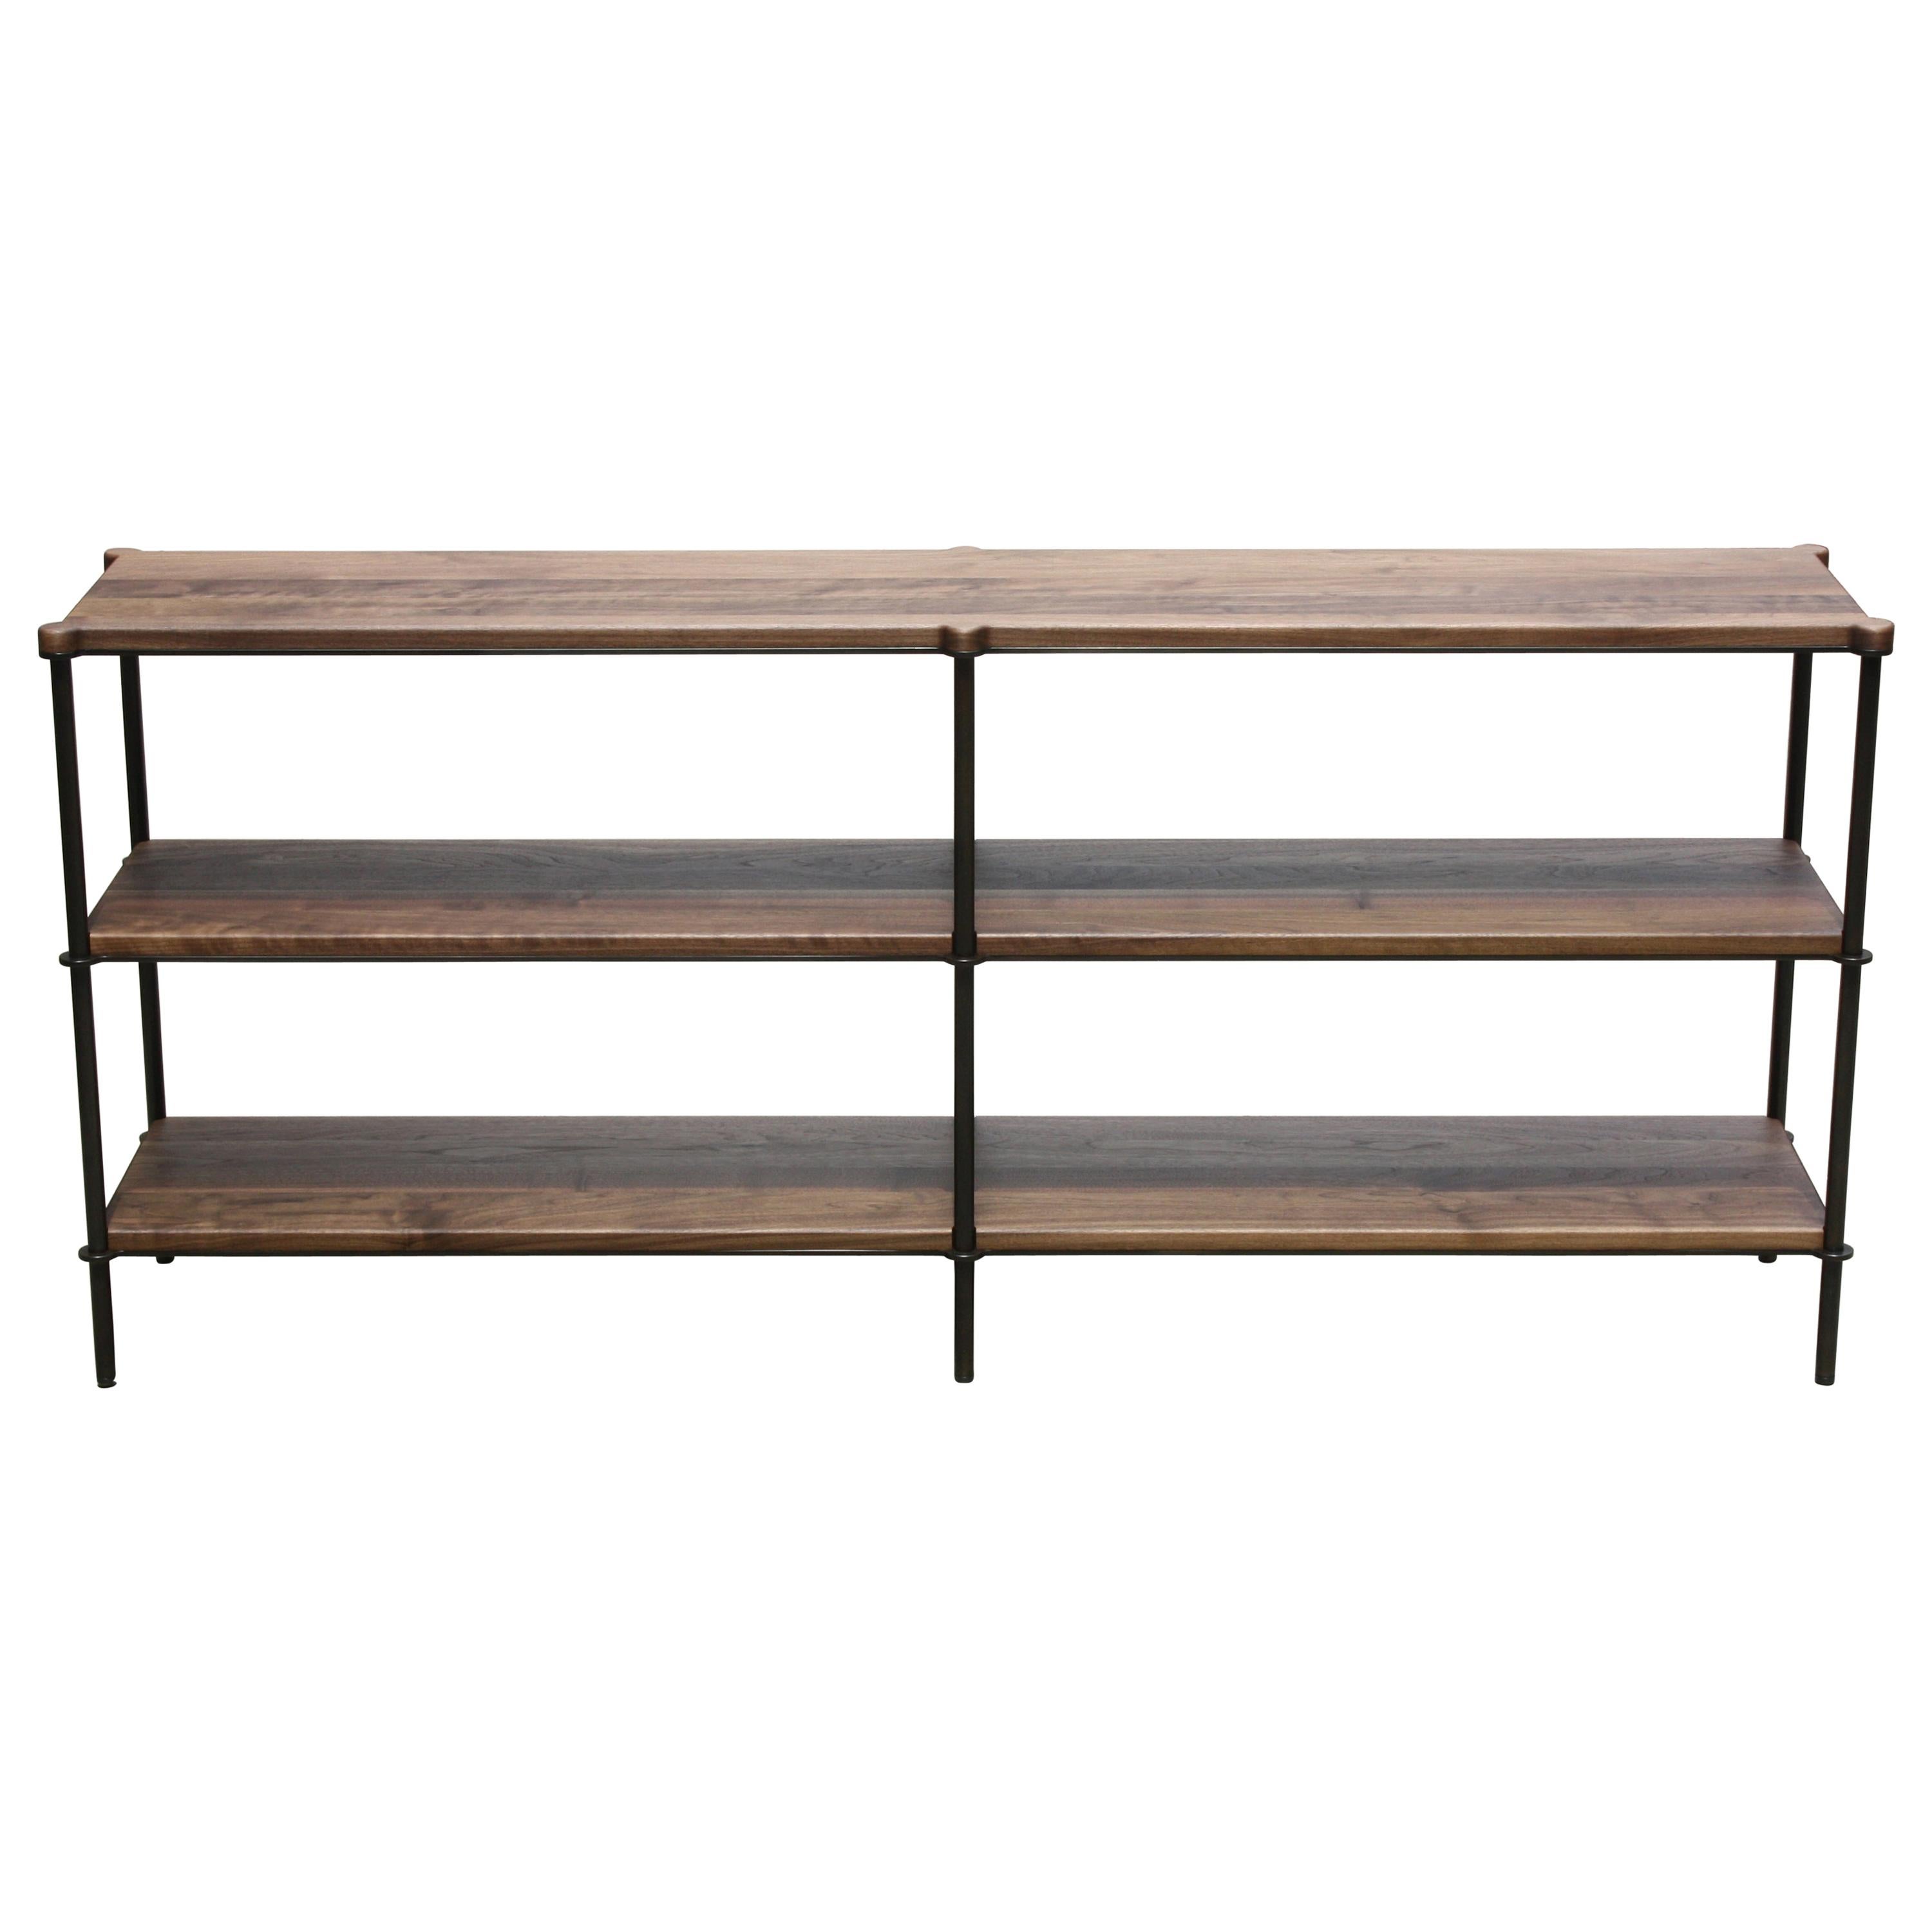 Mezzo Customizable Metal Console Table with Solid Wood Shelves by Laylo Studio